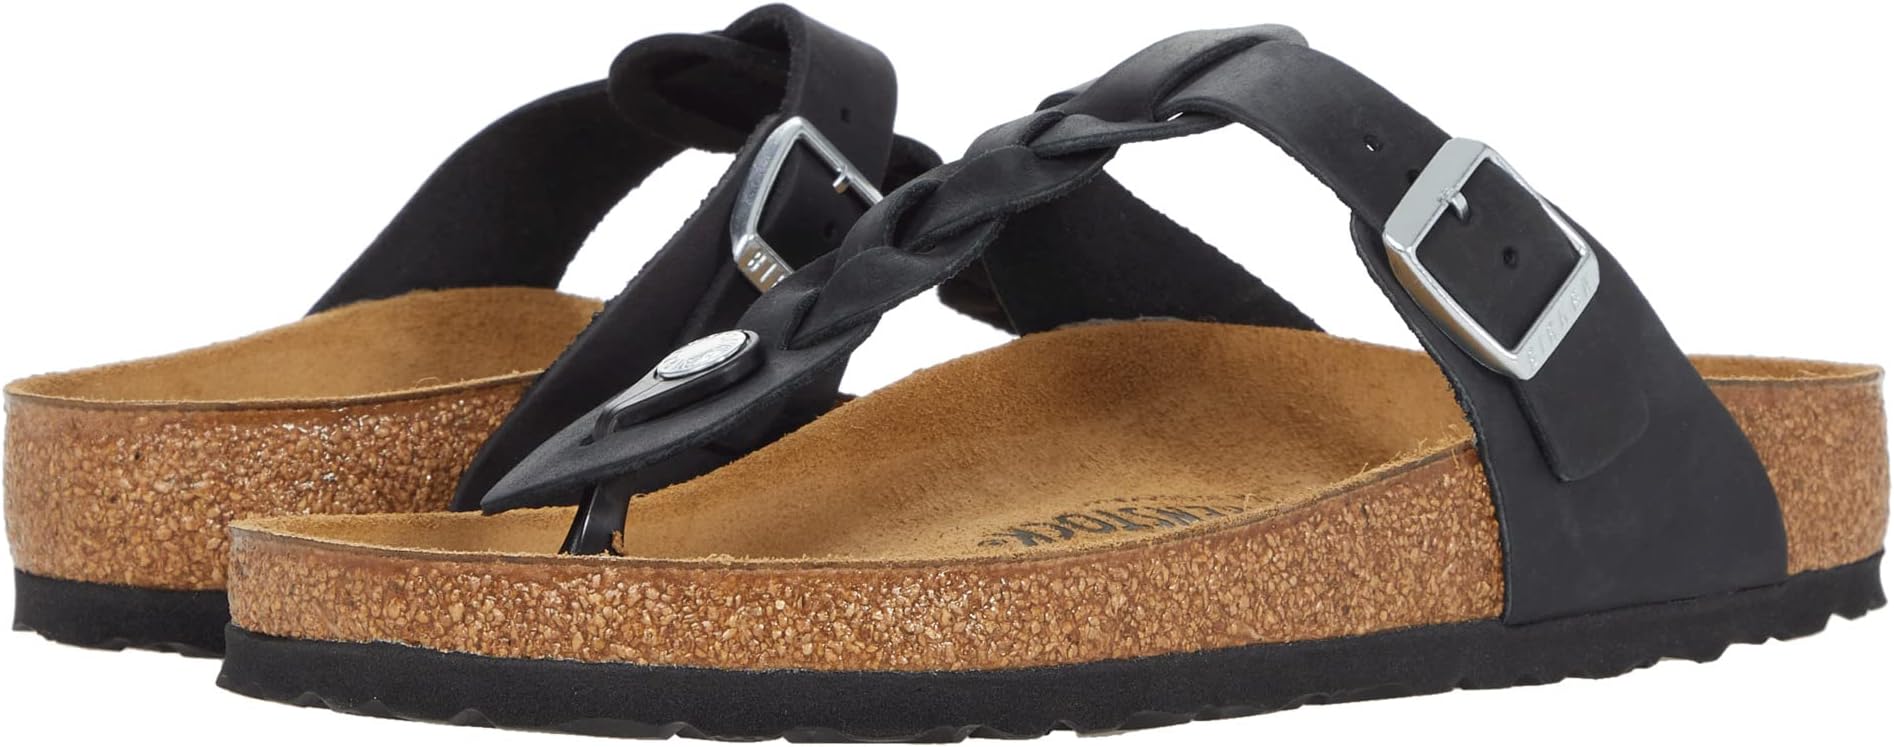 Шлепанцы Gizeh Braided - Oiled Leather Birkenstock, цвет Black Oiled Leather